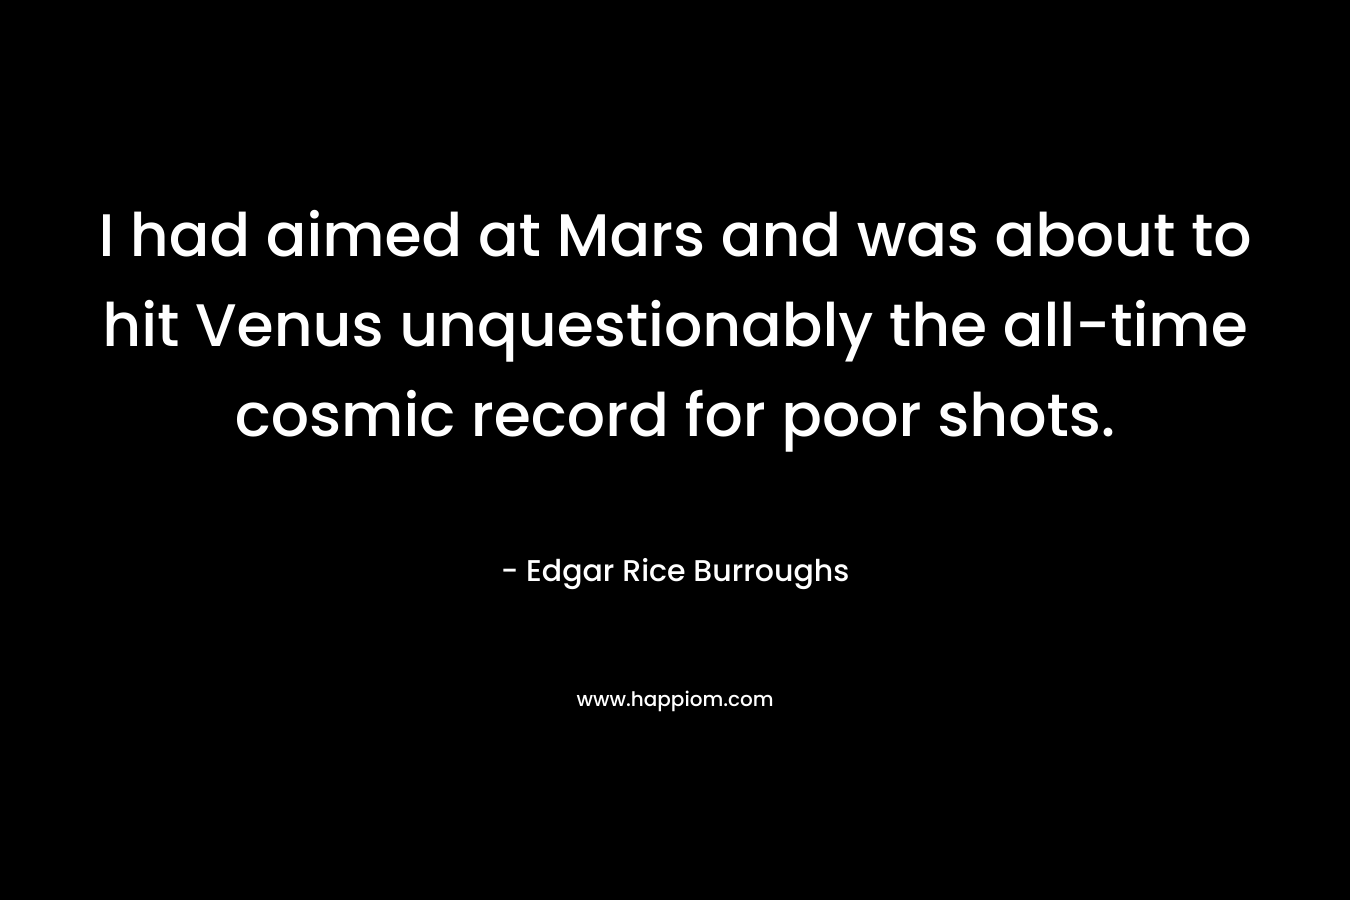 I had aimed at Mars and was about to hit Venus unquestionably the all-time cosmic record for poor shots.  – Edgar Rice Burroughs